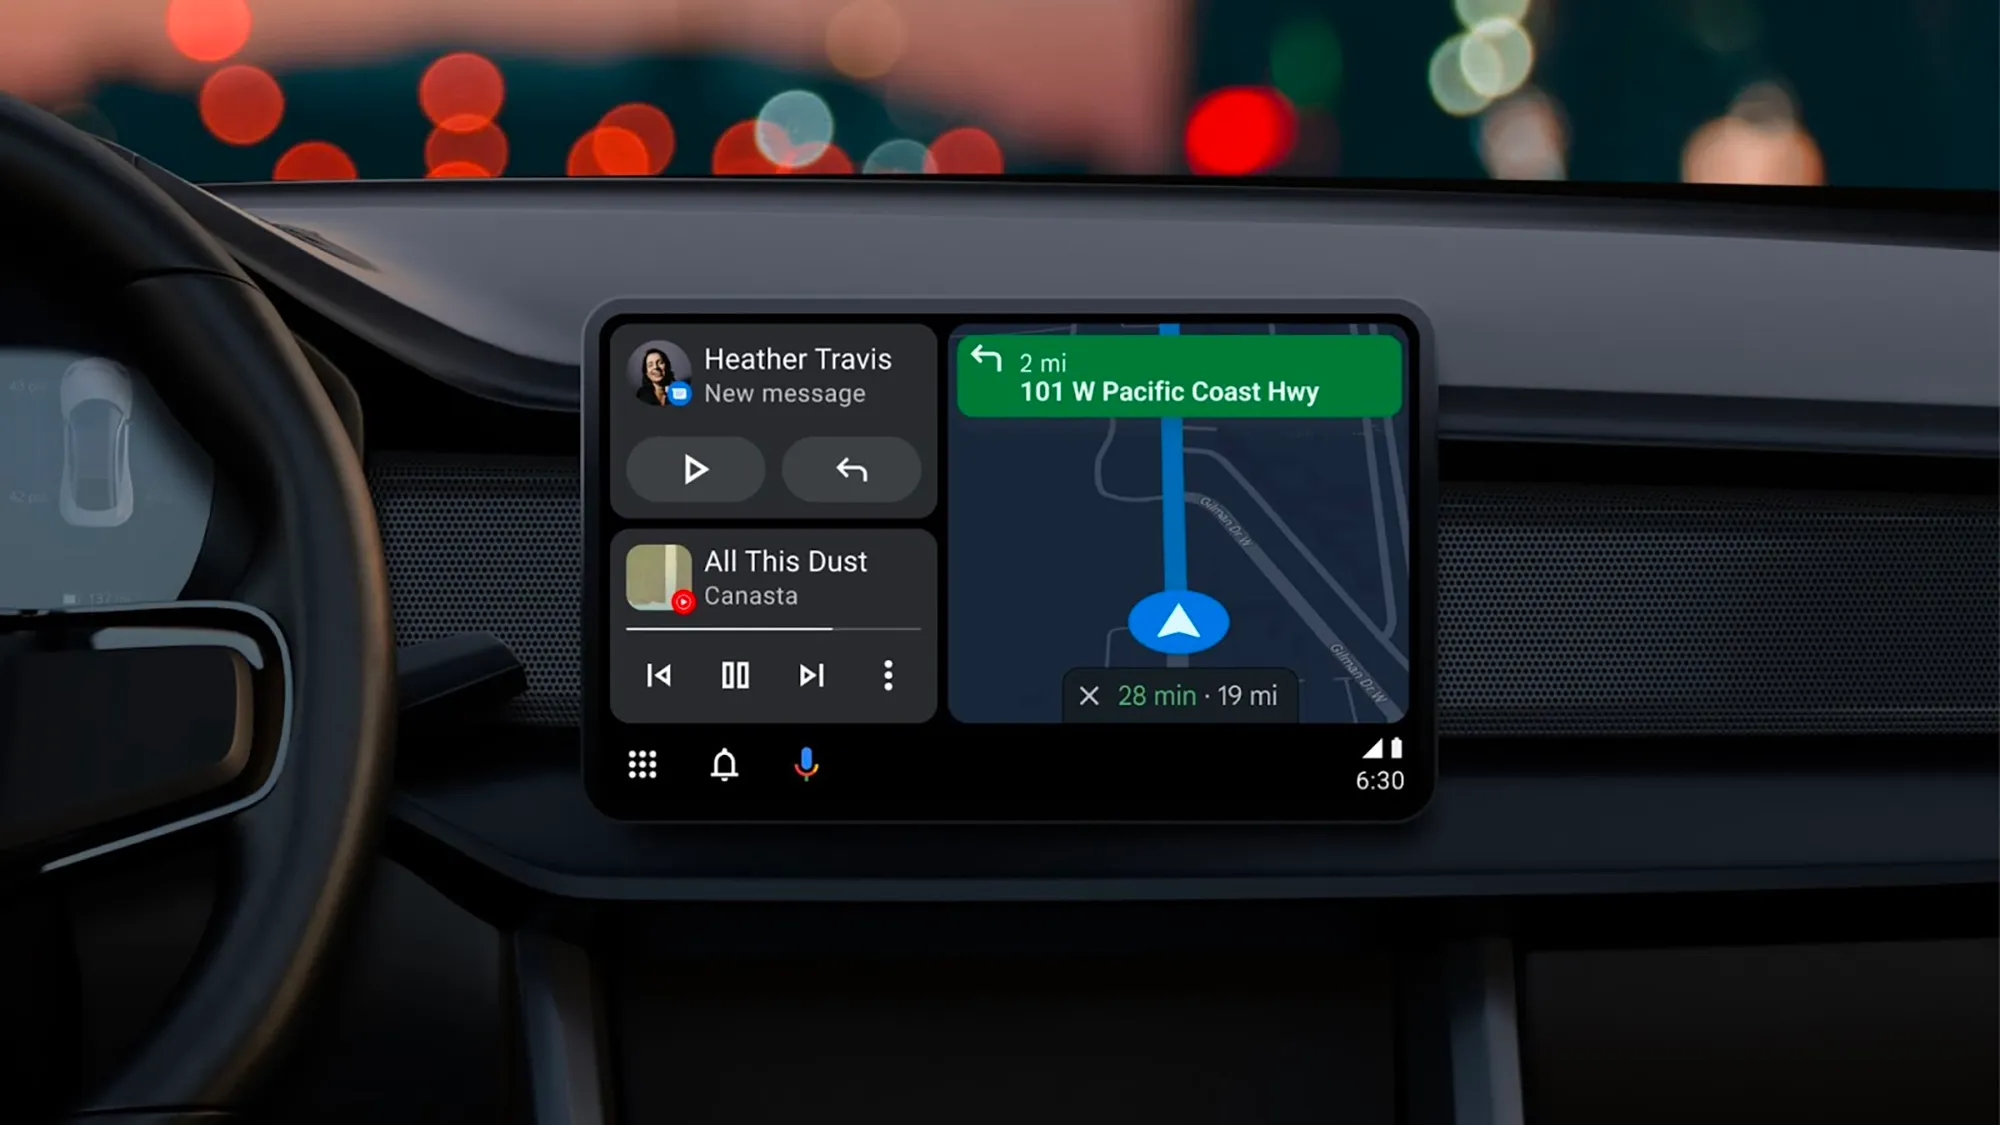 Google launches Android auto 12.3 update